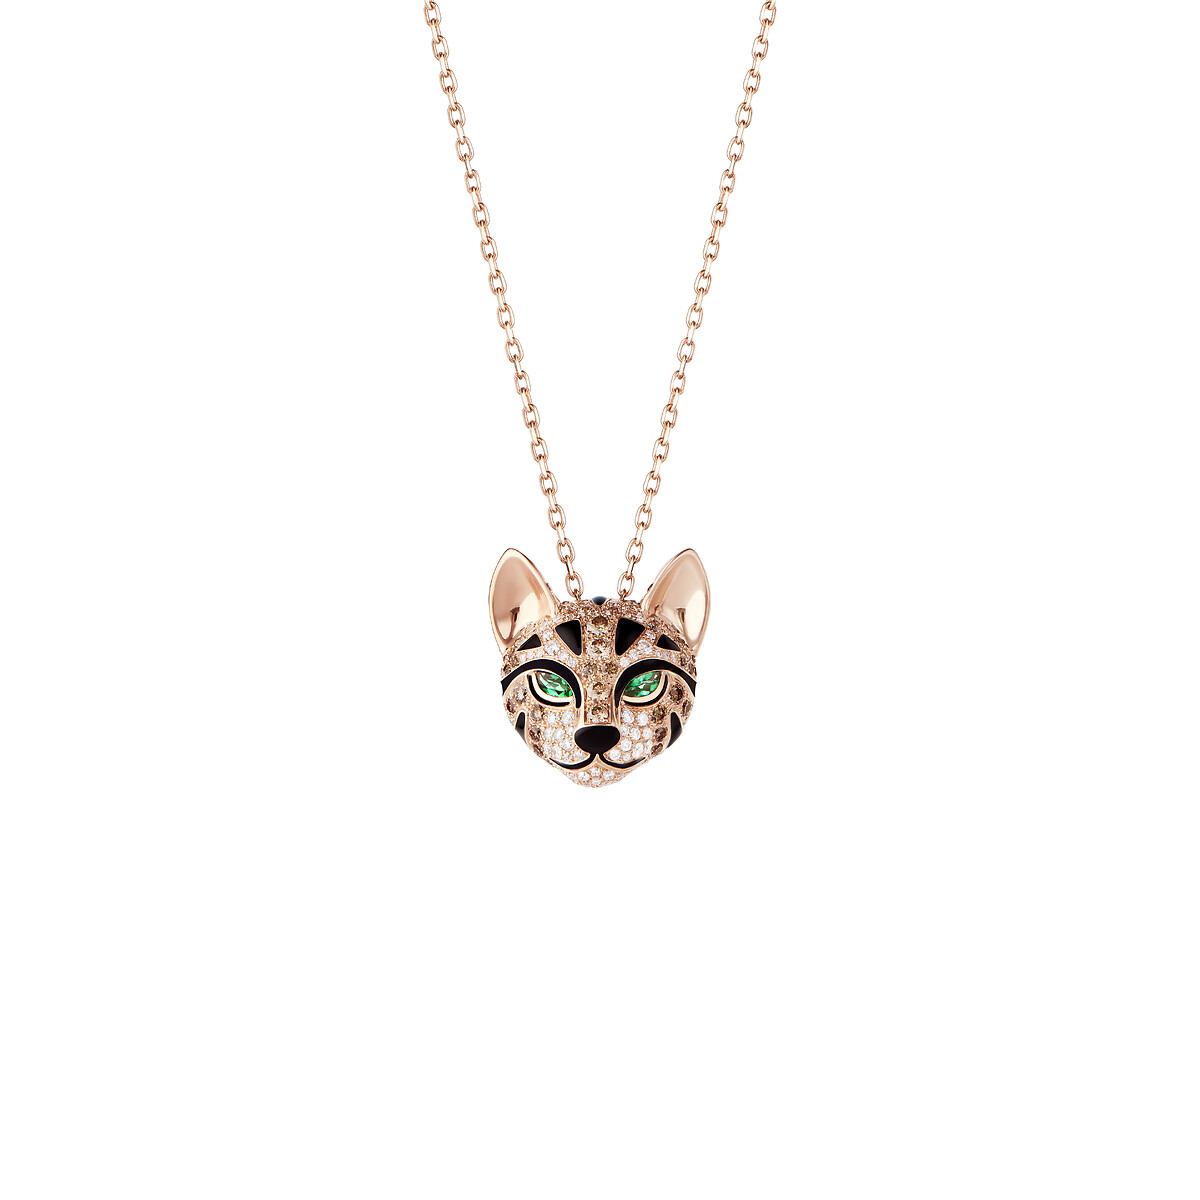 First product packshot Fuzzy, the Leopard Cat pendant